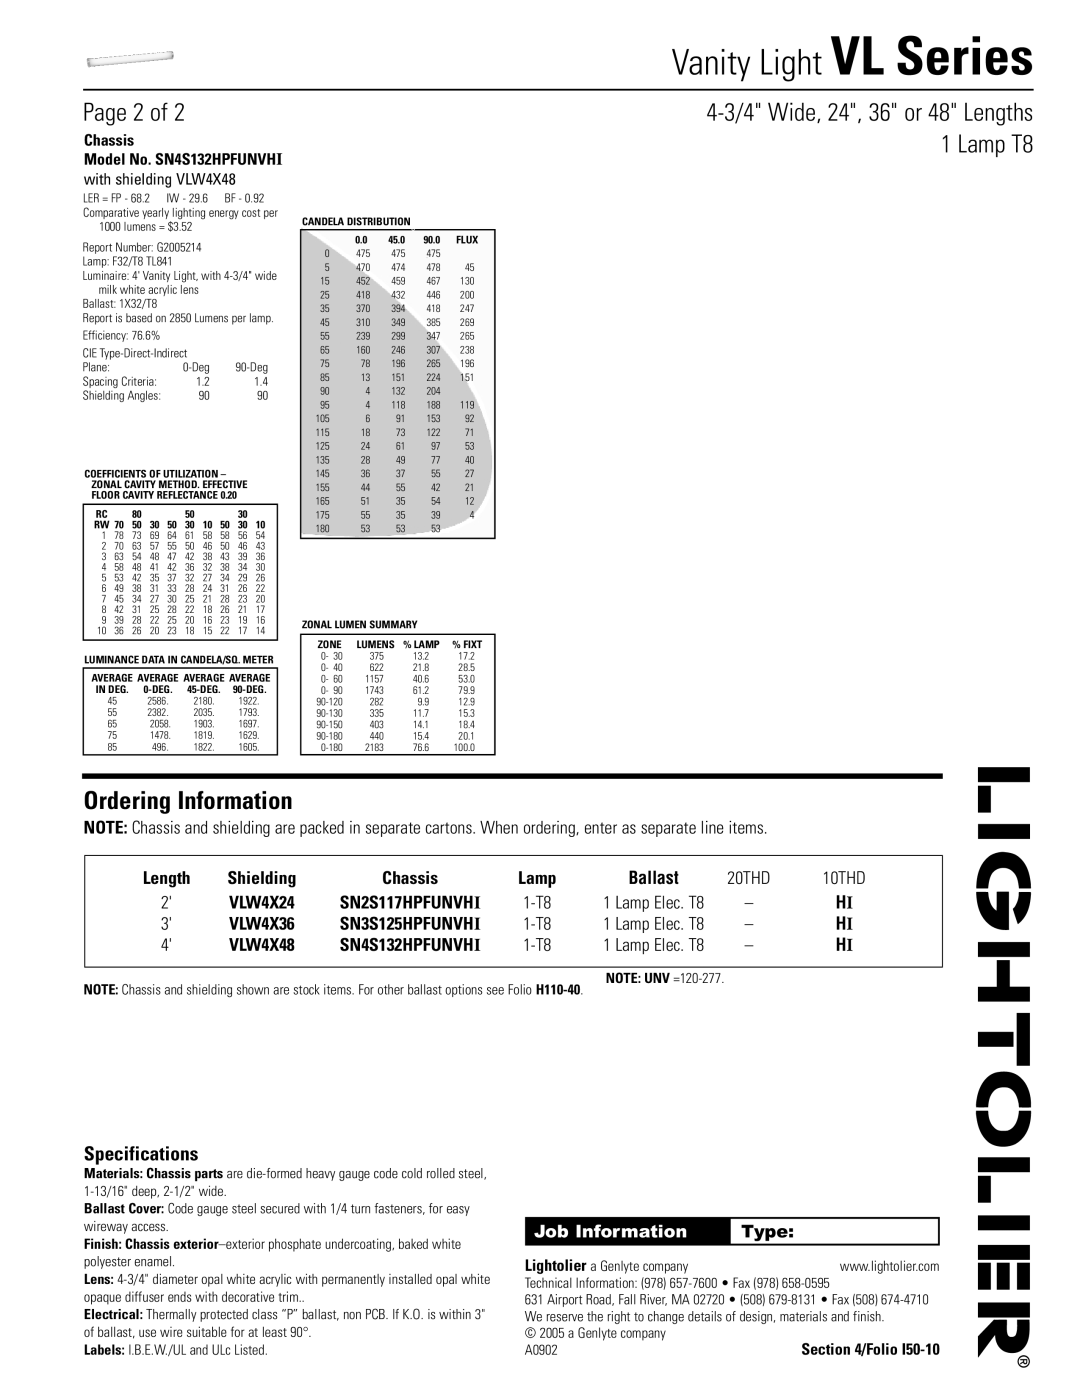 Lightolier VL Series Page 2 of, 4-3/4Wide, 24, 36 or 48 Lengths 1 Lamp T8, Specifications, Shielding, VLW4X24, VLW4X36 